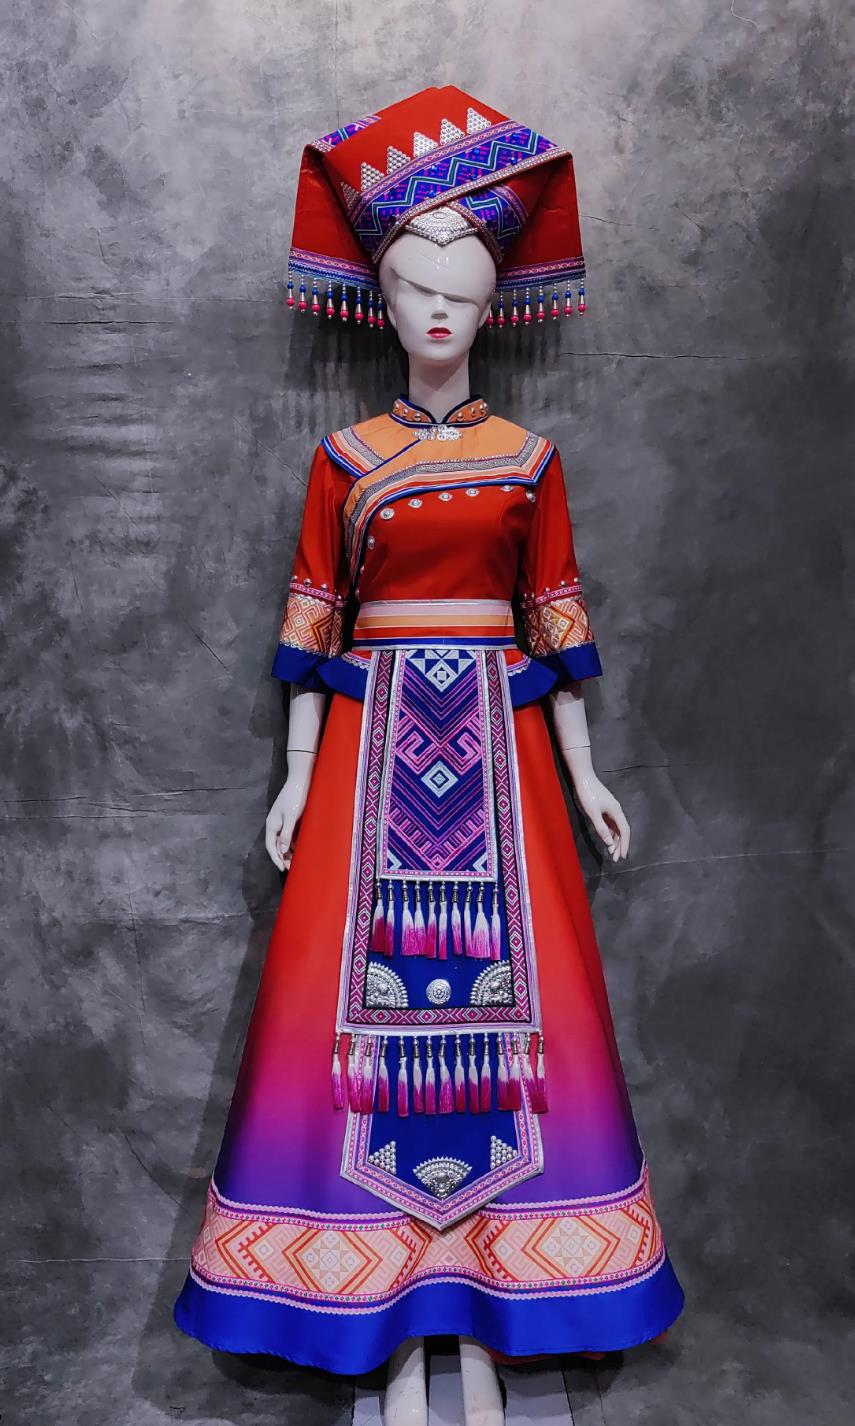 China Zhuang Ethnic Festival Clothing National Minority Dance Red Dress Chinese Guangxi March 3rd Woman Solo Costume